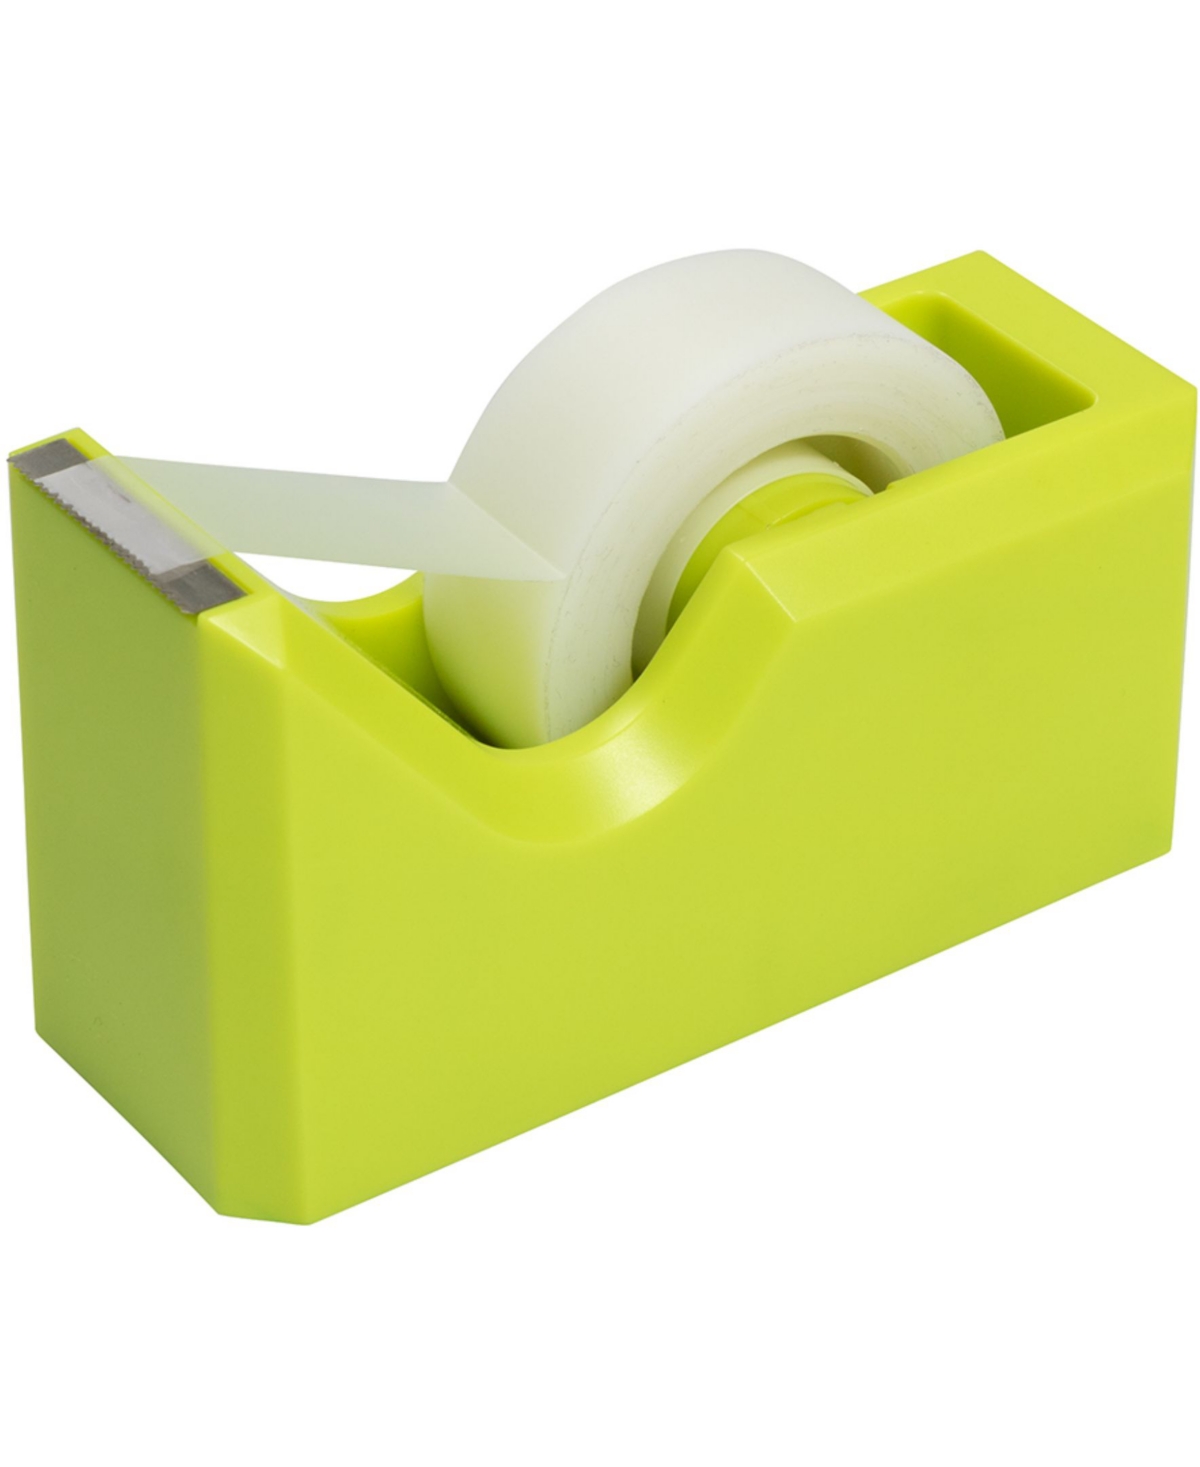 Jam Paper Colorful Desk Tape Dispensers In Lime Green